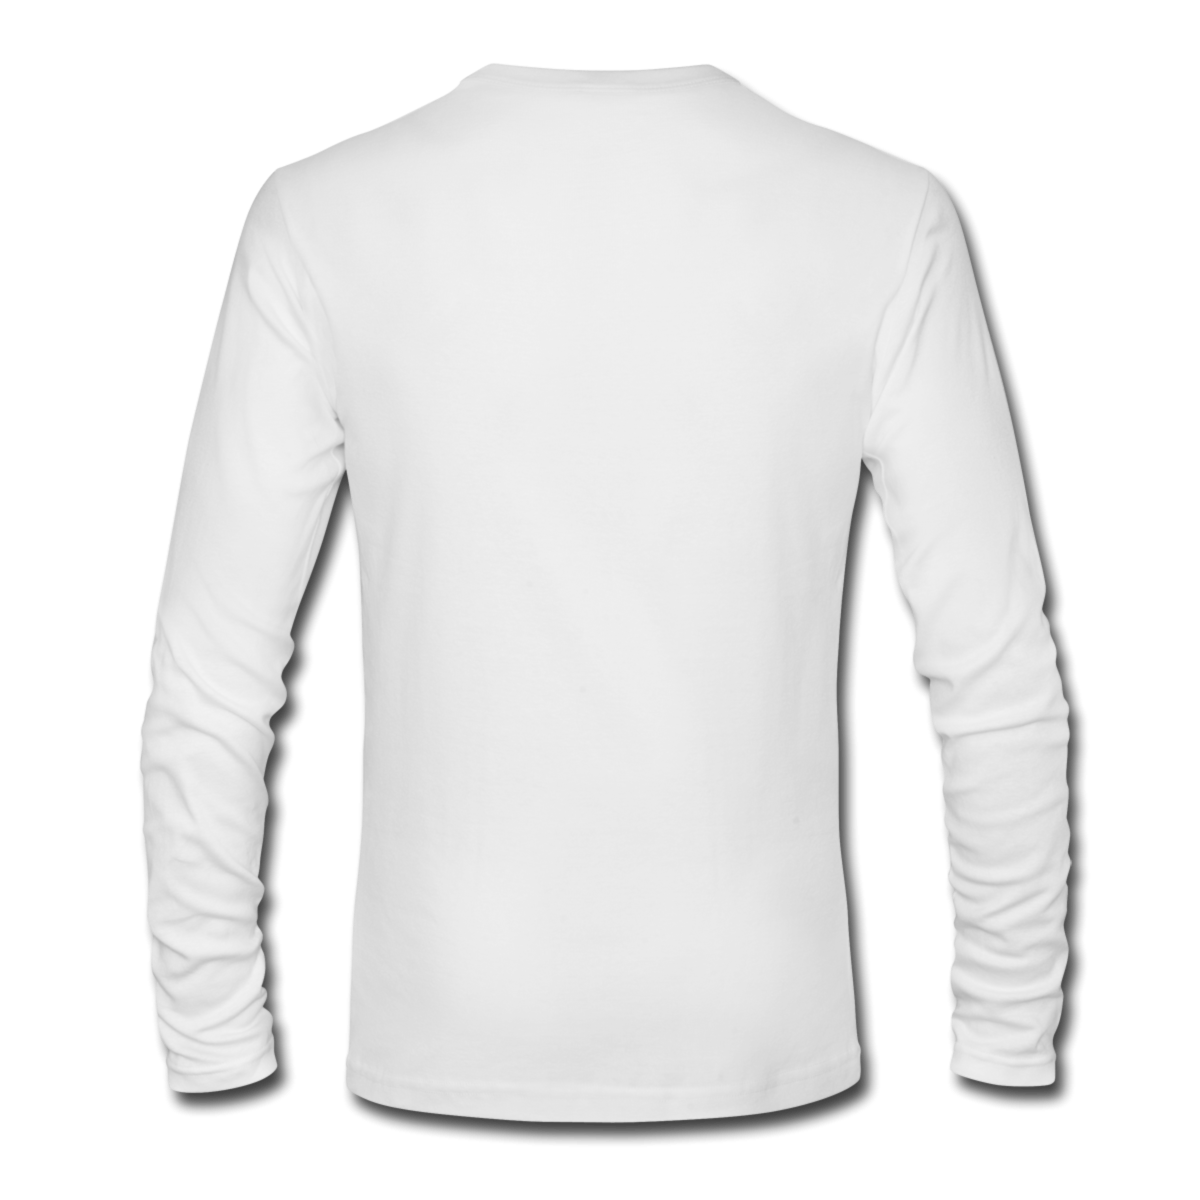 Plain White T Shirt Png Hd - Plain white t shirts is one of the clipart ...